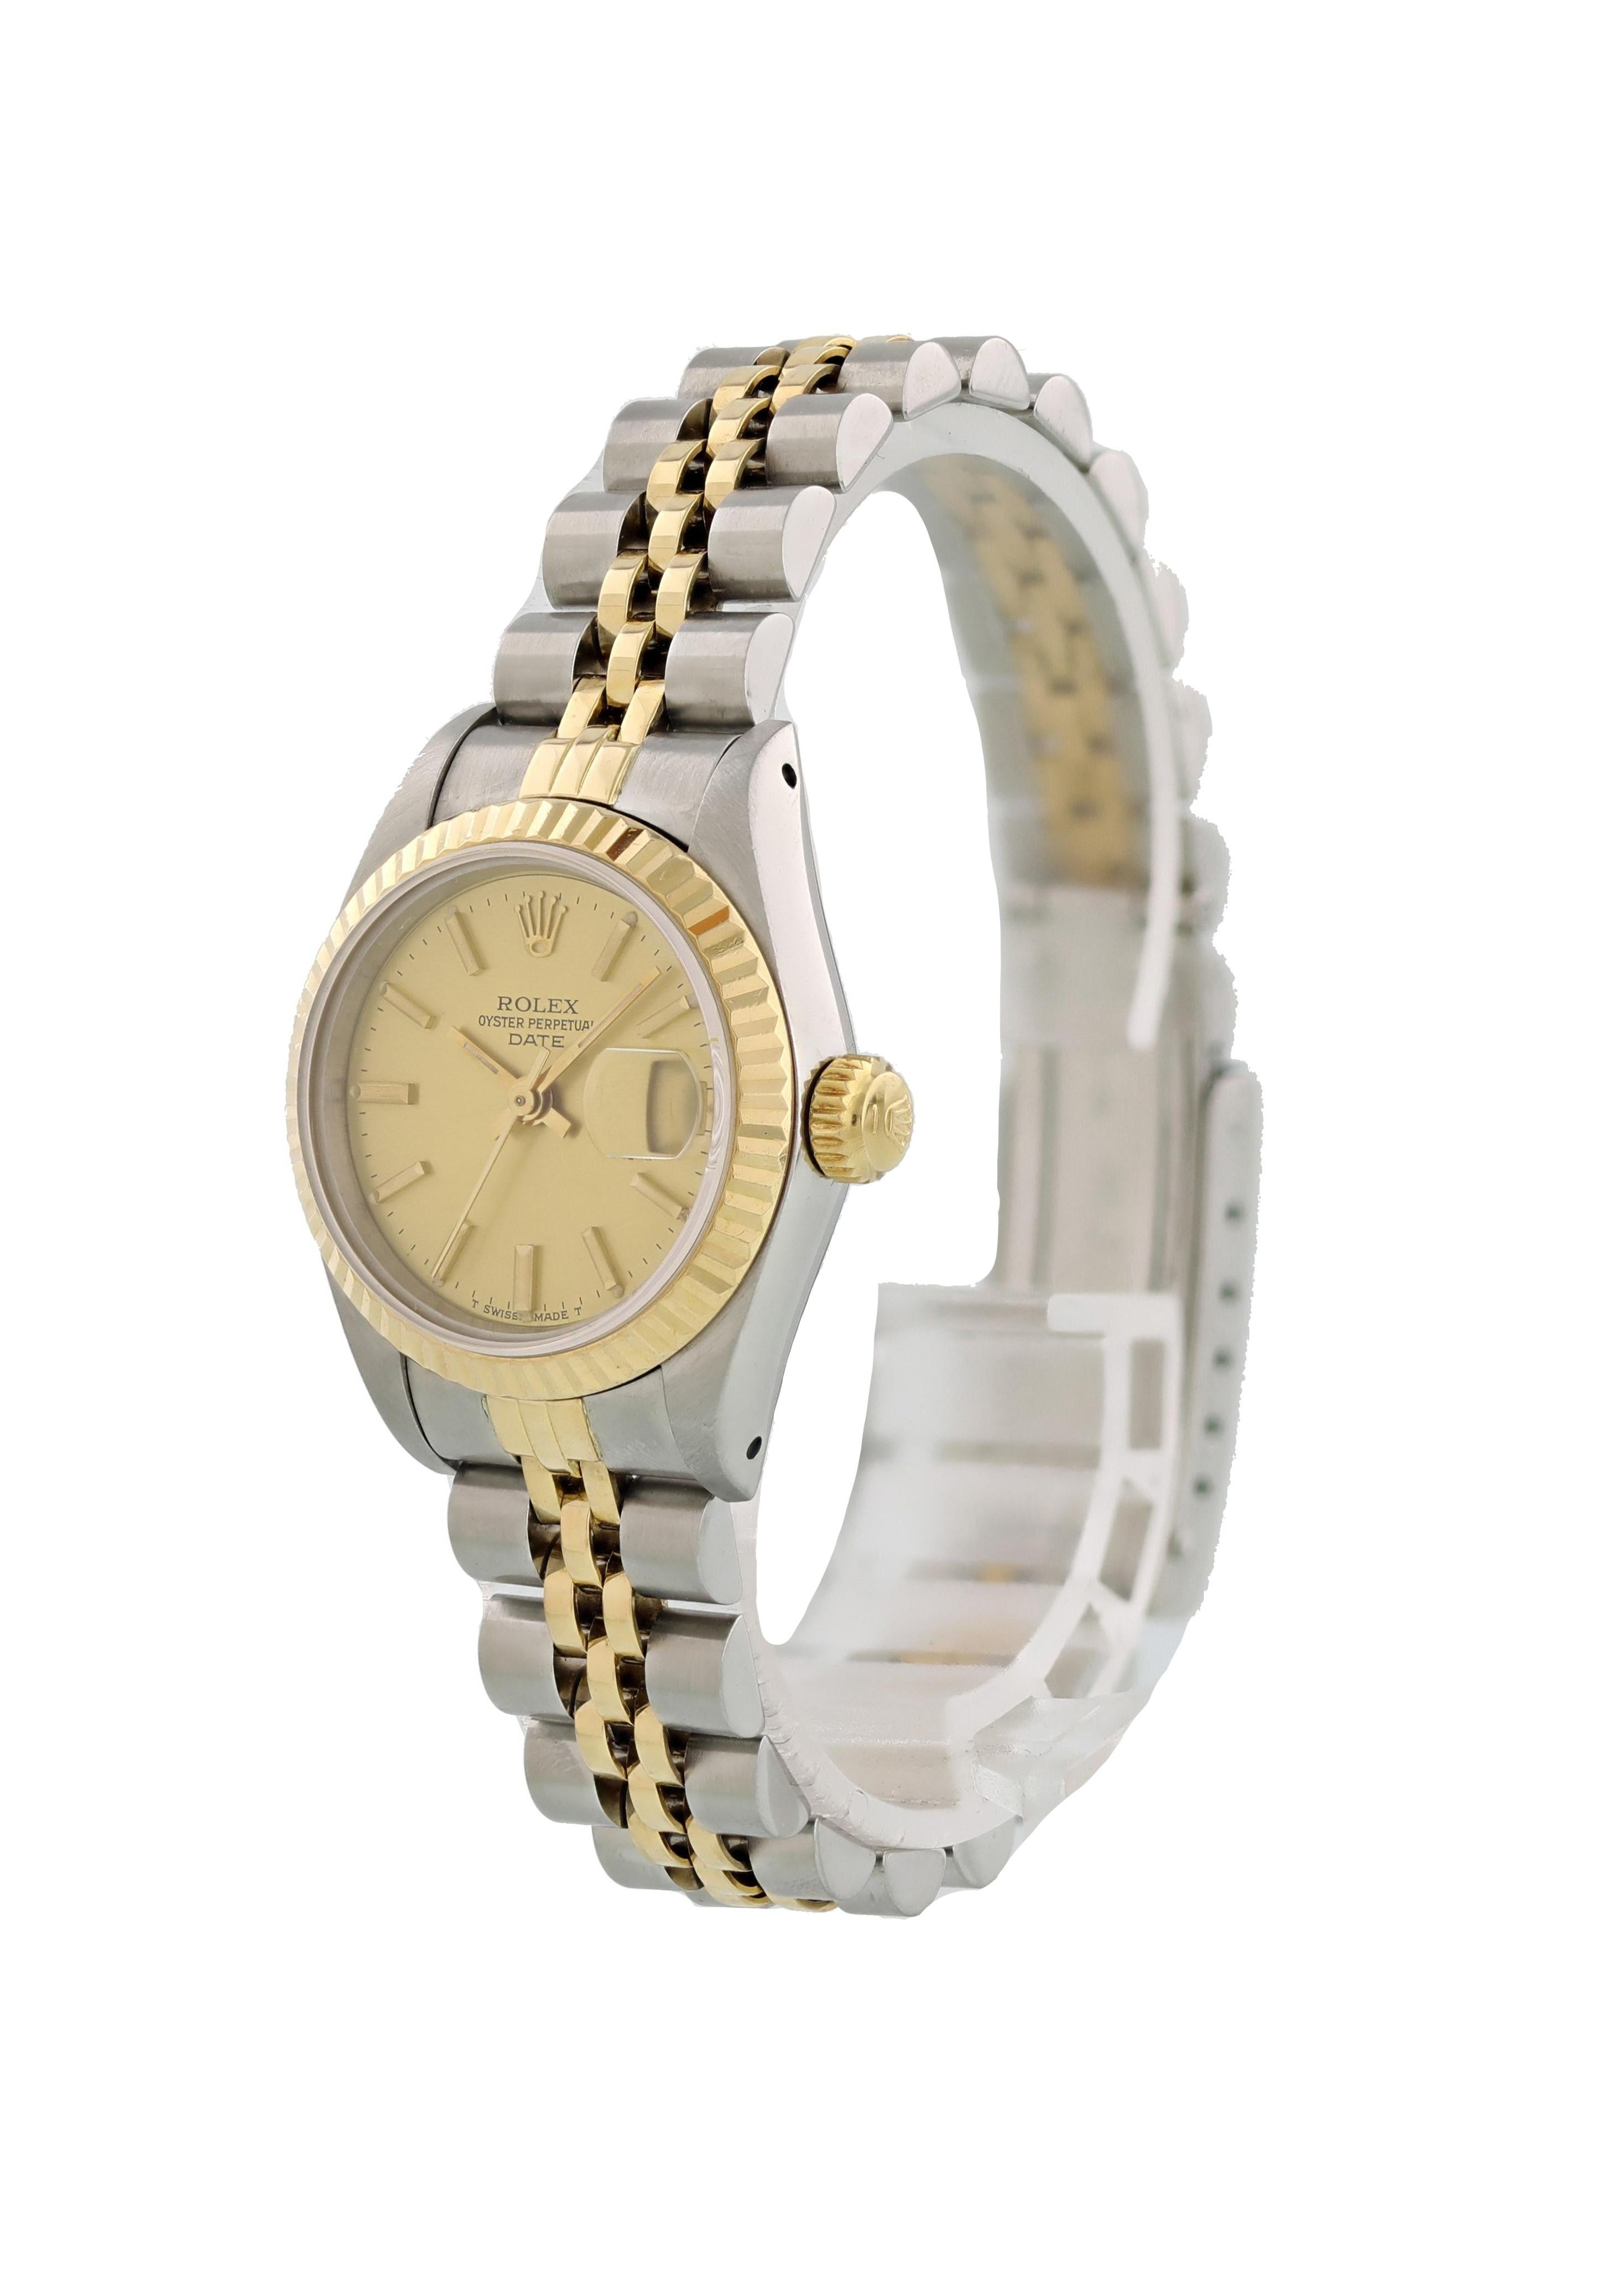 Rolex Oyster Perpetual Date 69173 Ladies Watch. 26mm stainless steel case. 18k yellow gold fluted bezel. Champagne dial with gold-tone hands and index hour markers. Minute markers around the outer dial. Quickset date display at the 3 o'clock